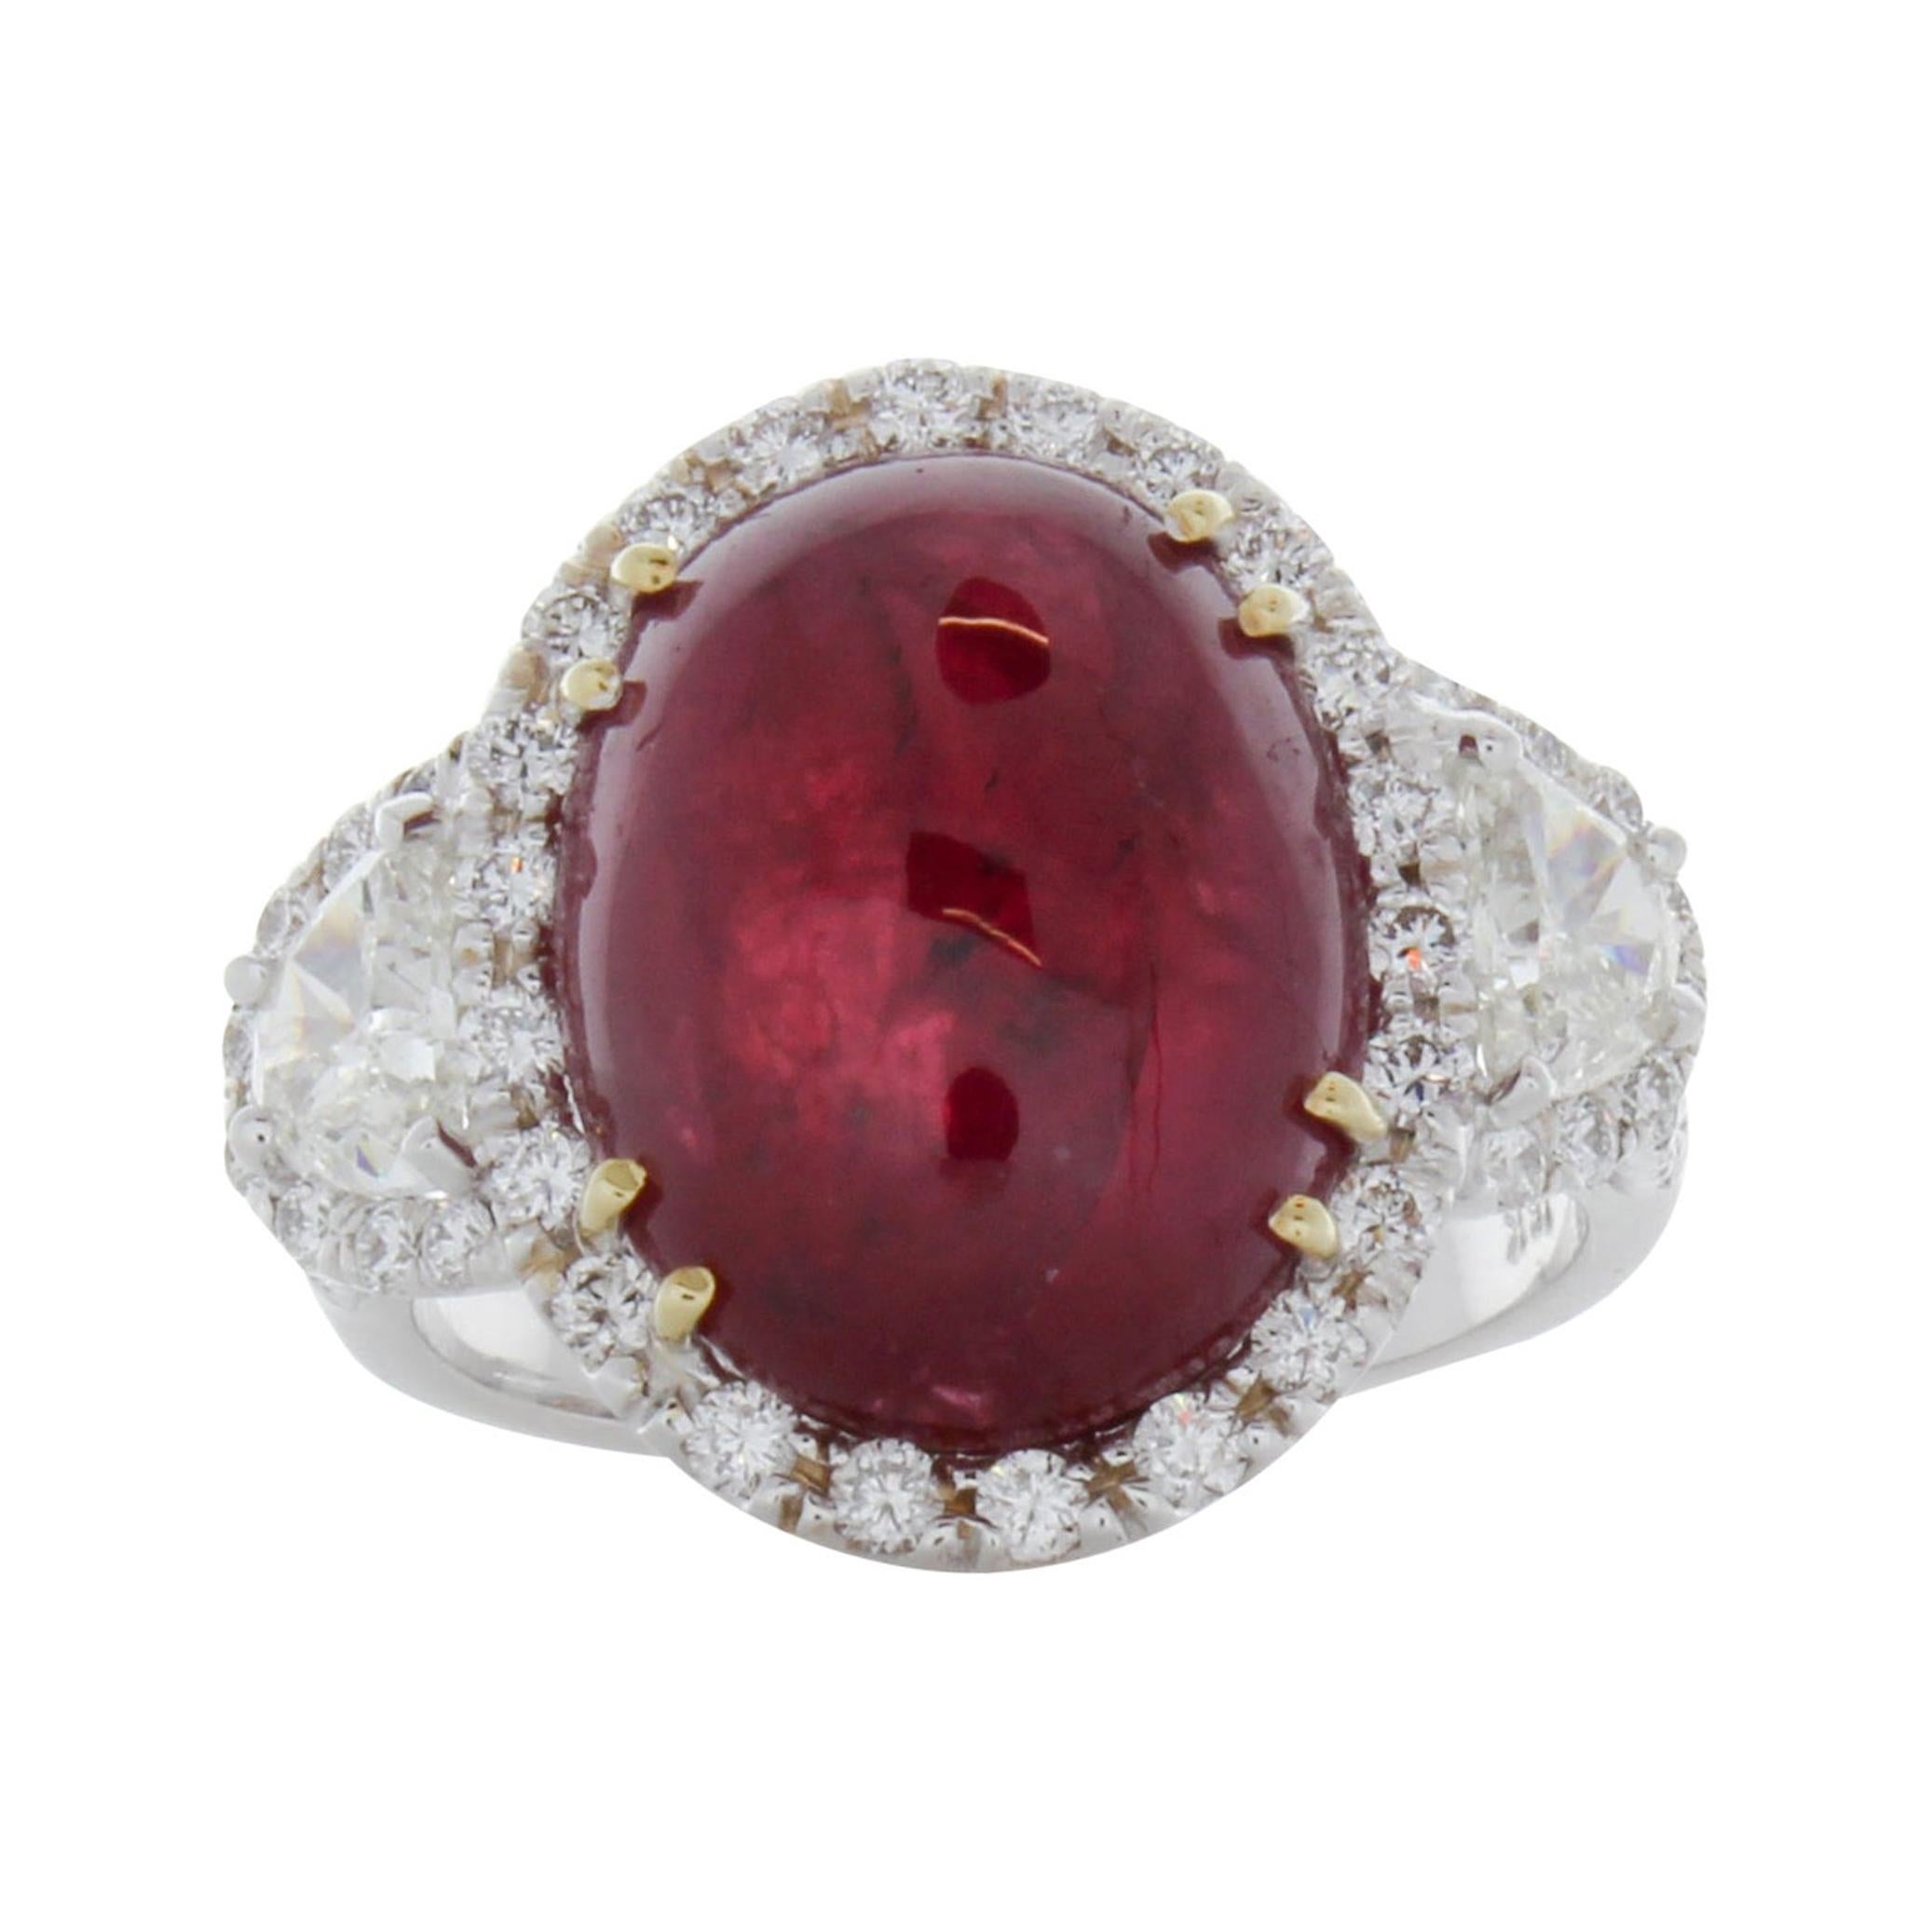 11.48 Carat Cabochon Oval Ruby & Diamond Ring in 18k White Gold